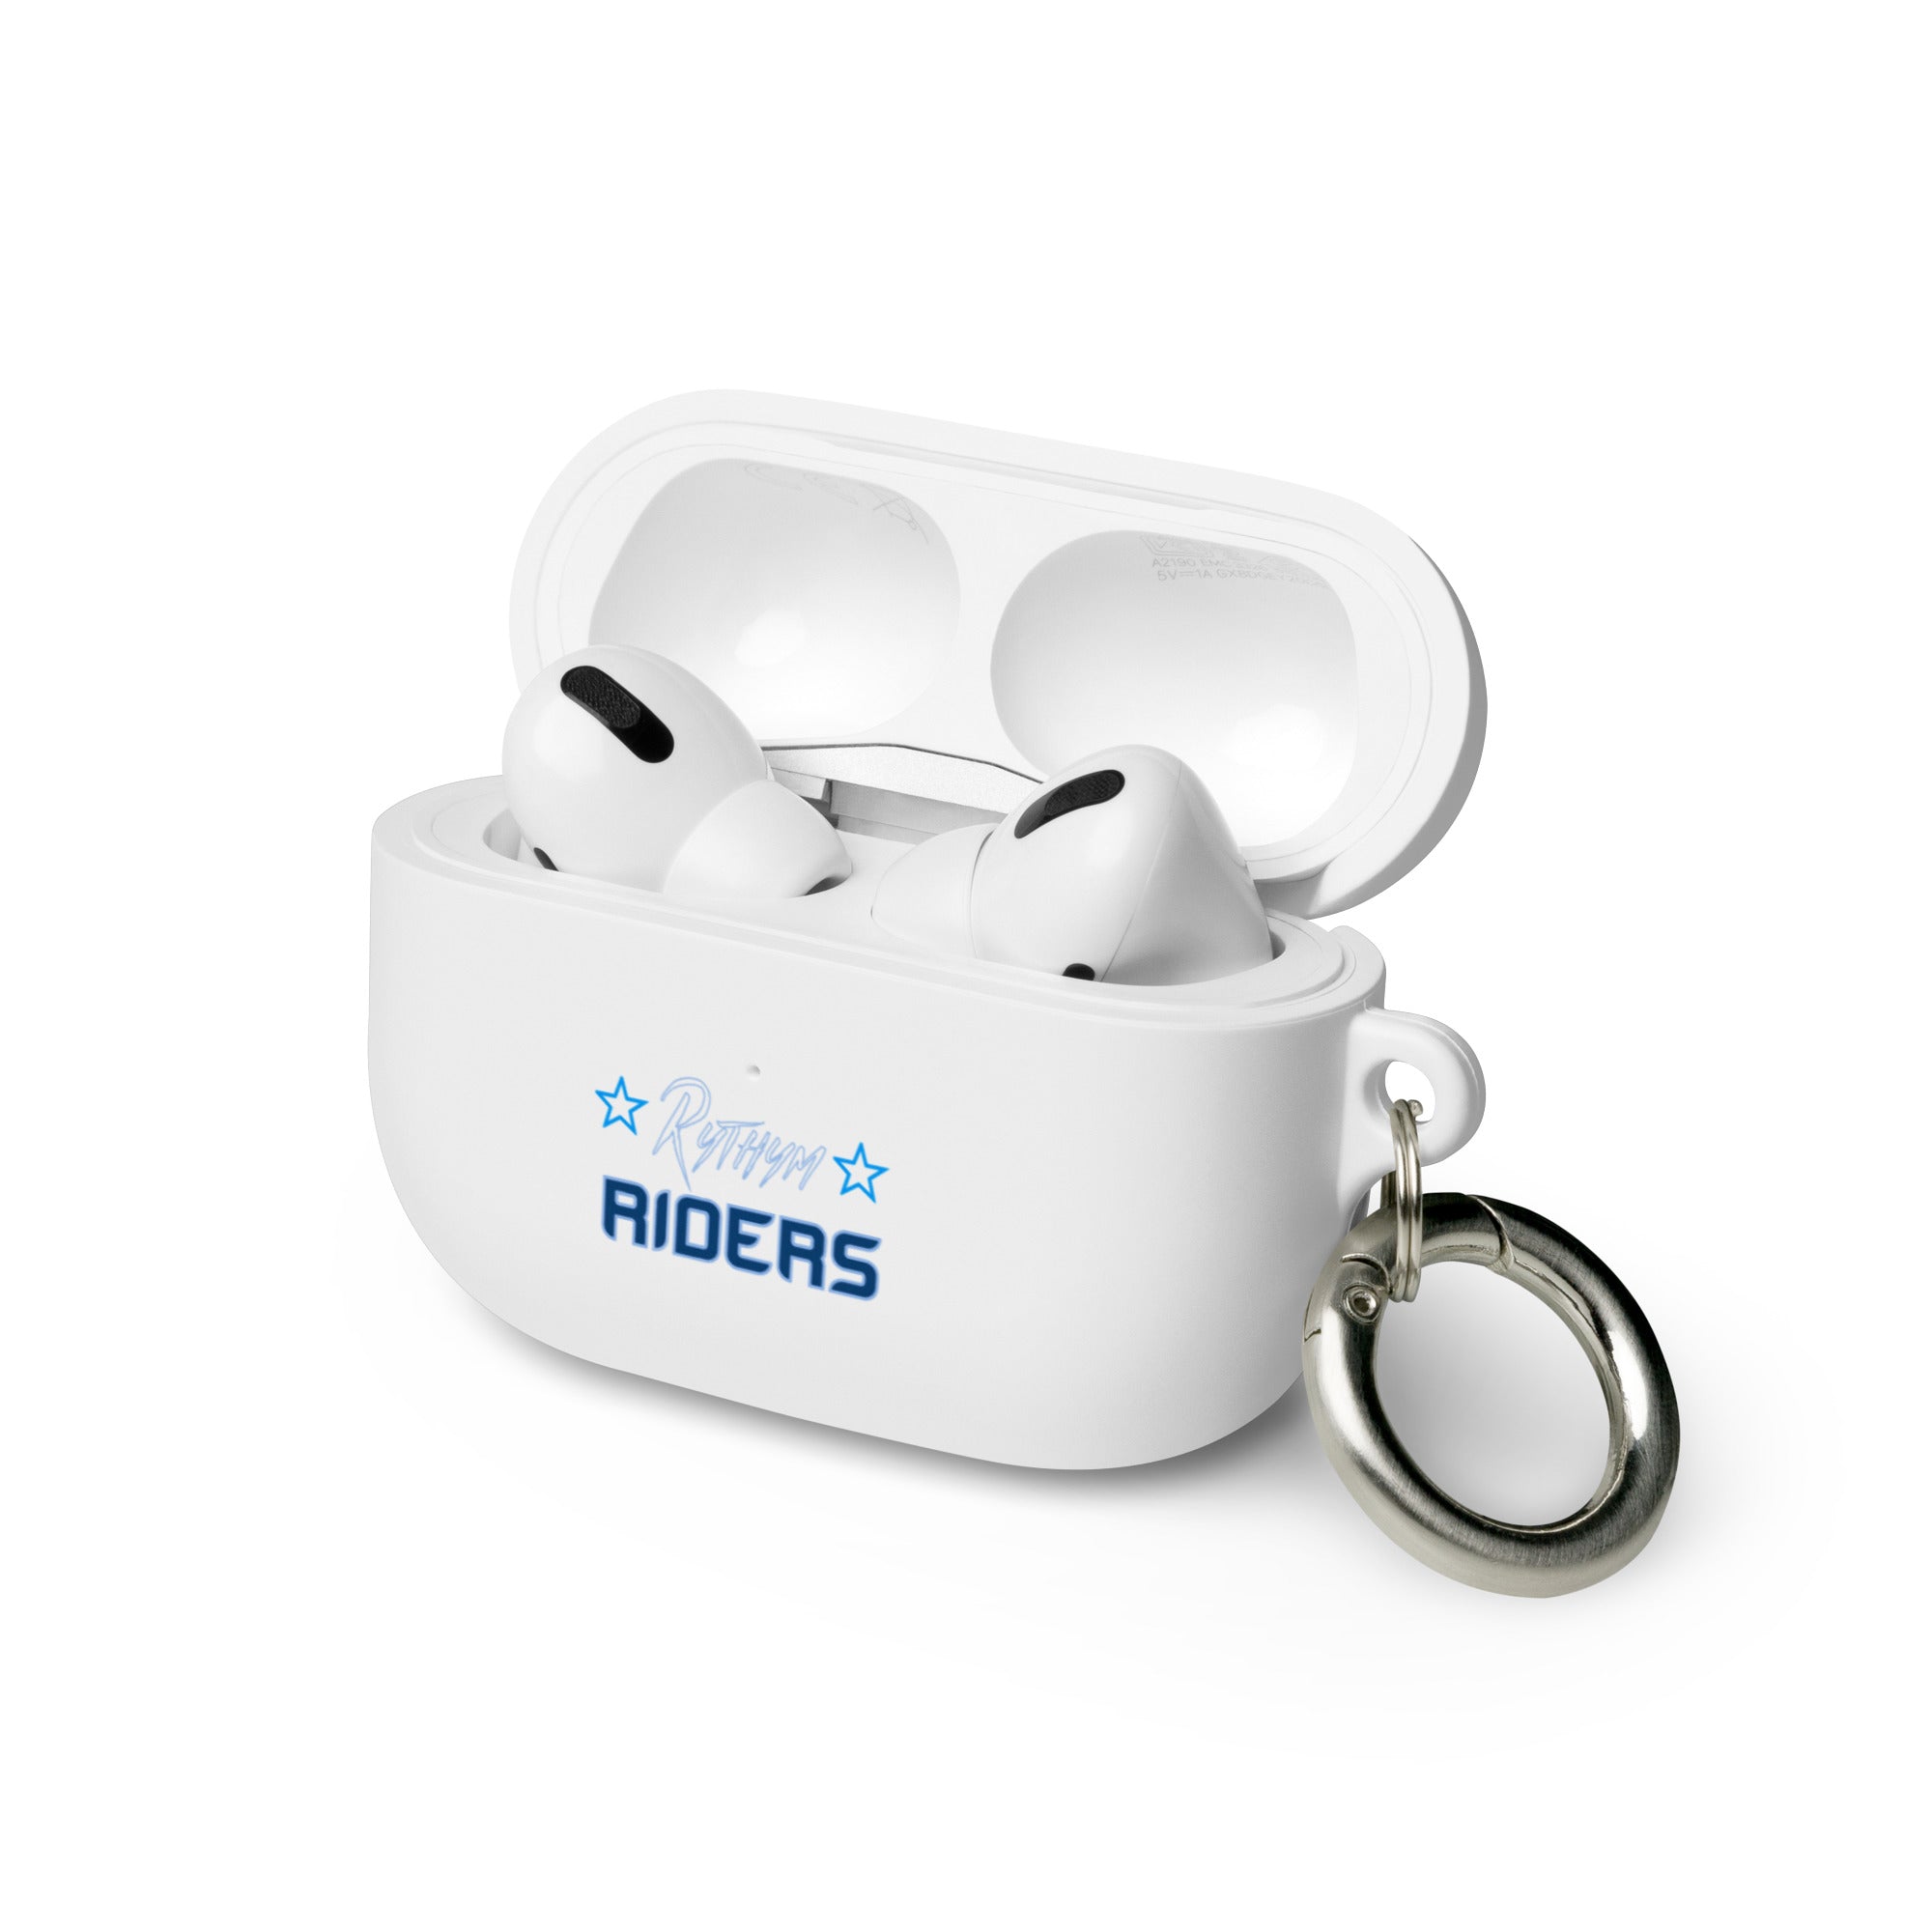 Rythym Riders AirPods case